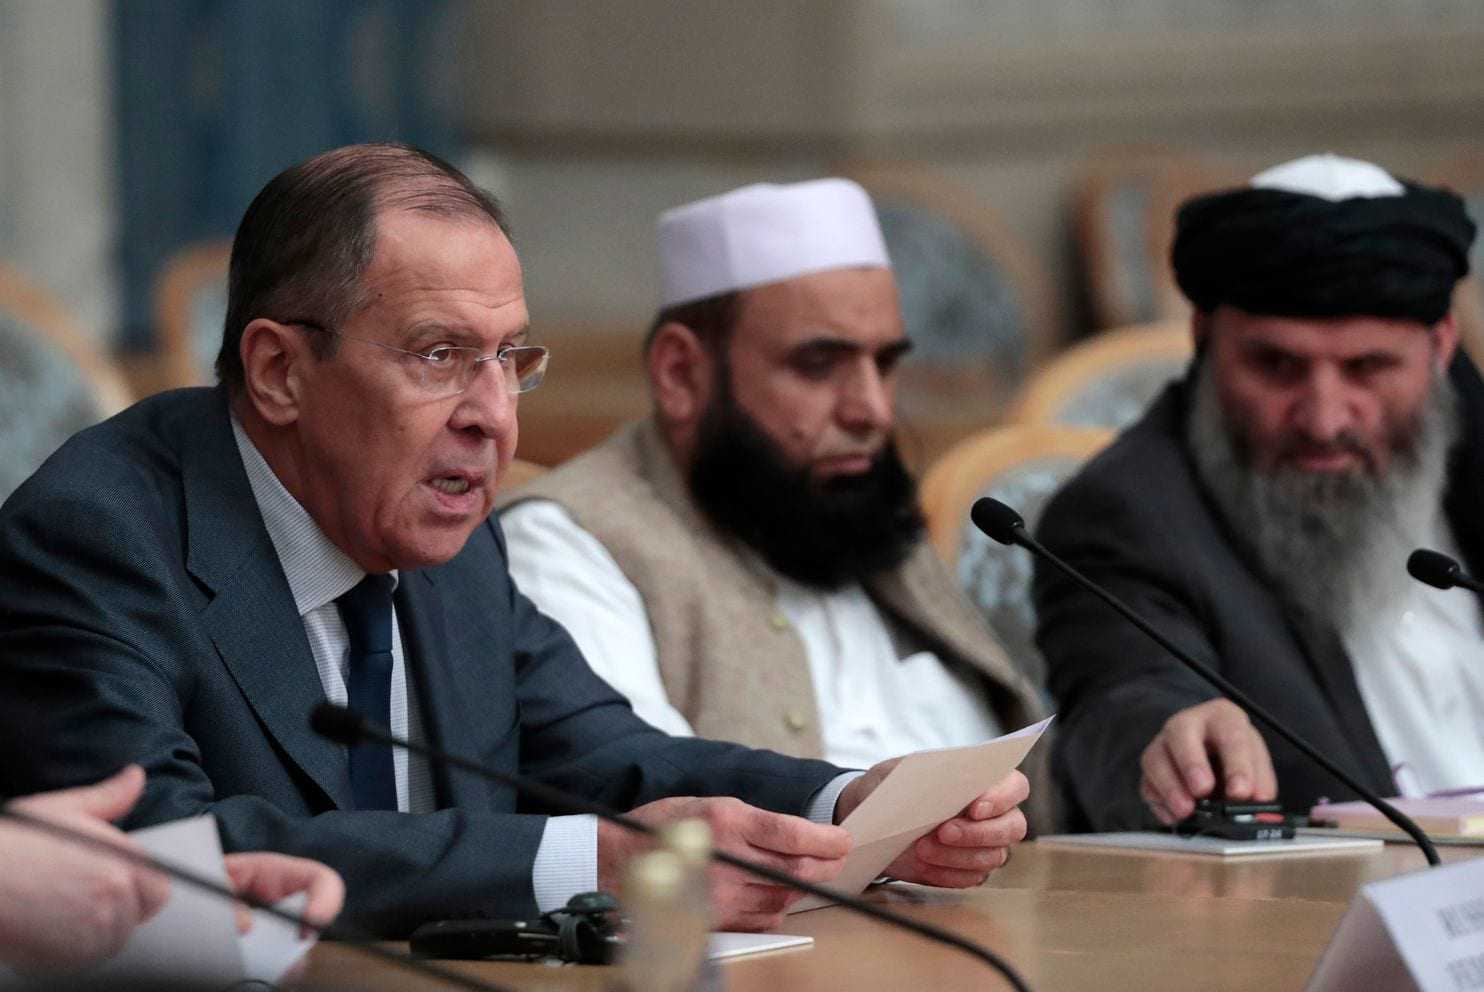 Moscow hosts peace talks with Taliban